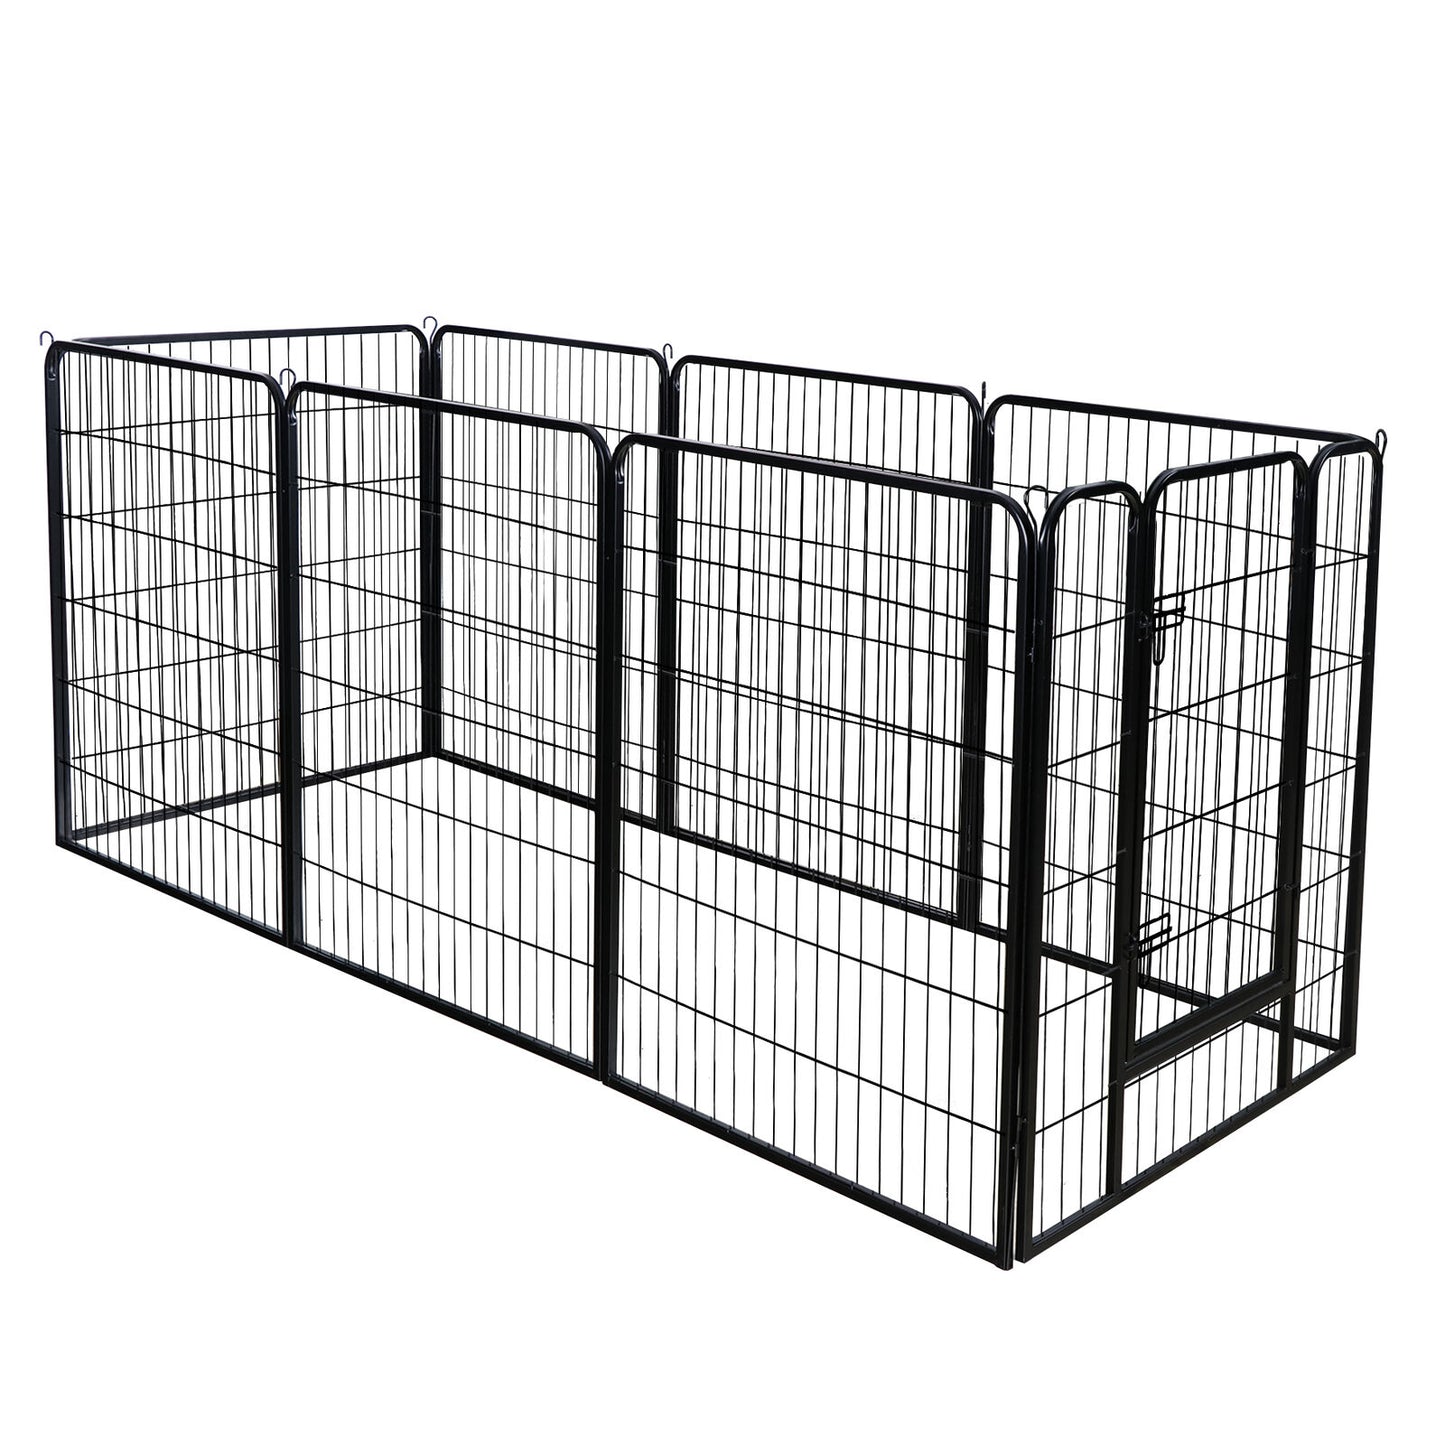 2X 39" Tall Foldable 8 Panels Metal Pet Dog Puppy Cat Exercise Fence Barrier